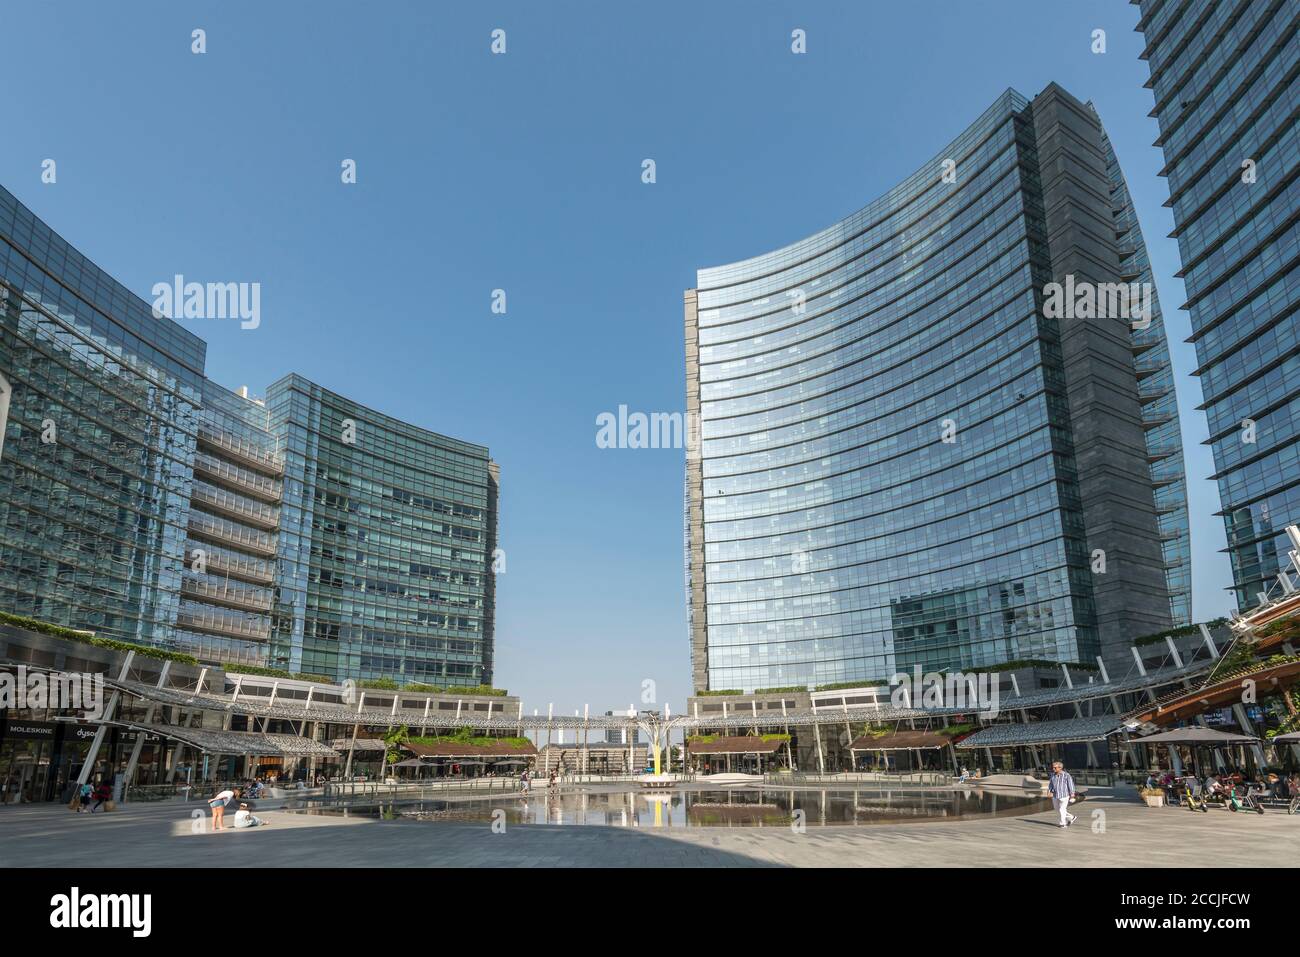 MILAN, ITALY - August 20 2020: cityscape with almost no people around main pond at business hub urban renewal development, shot on august 20 2020 at M Stock Photo